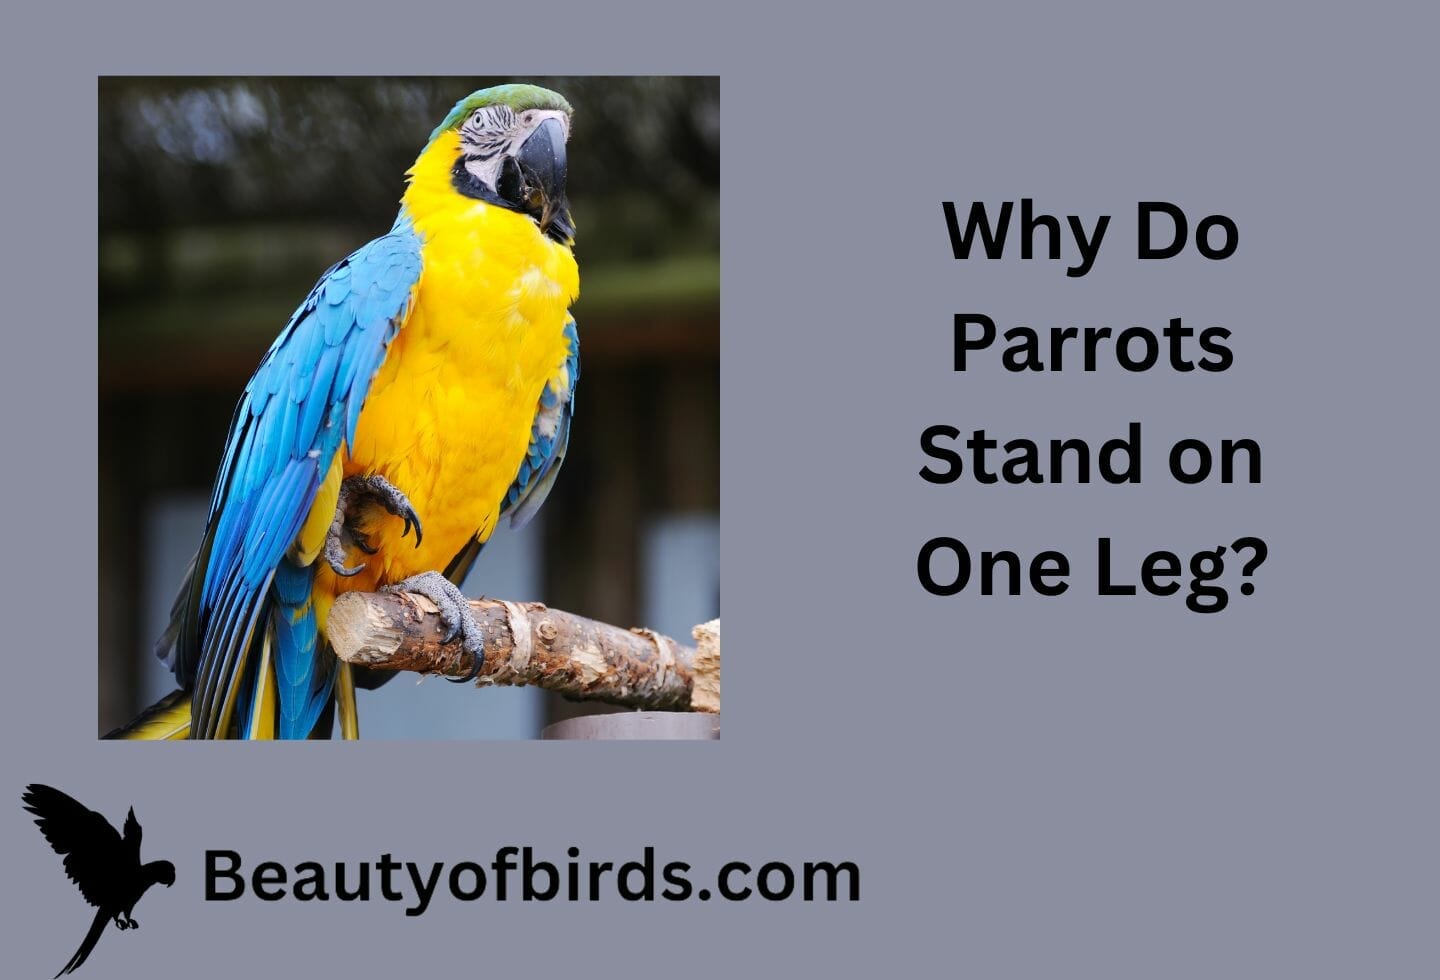 Why Do Parrots Stand on One Leg